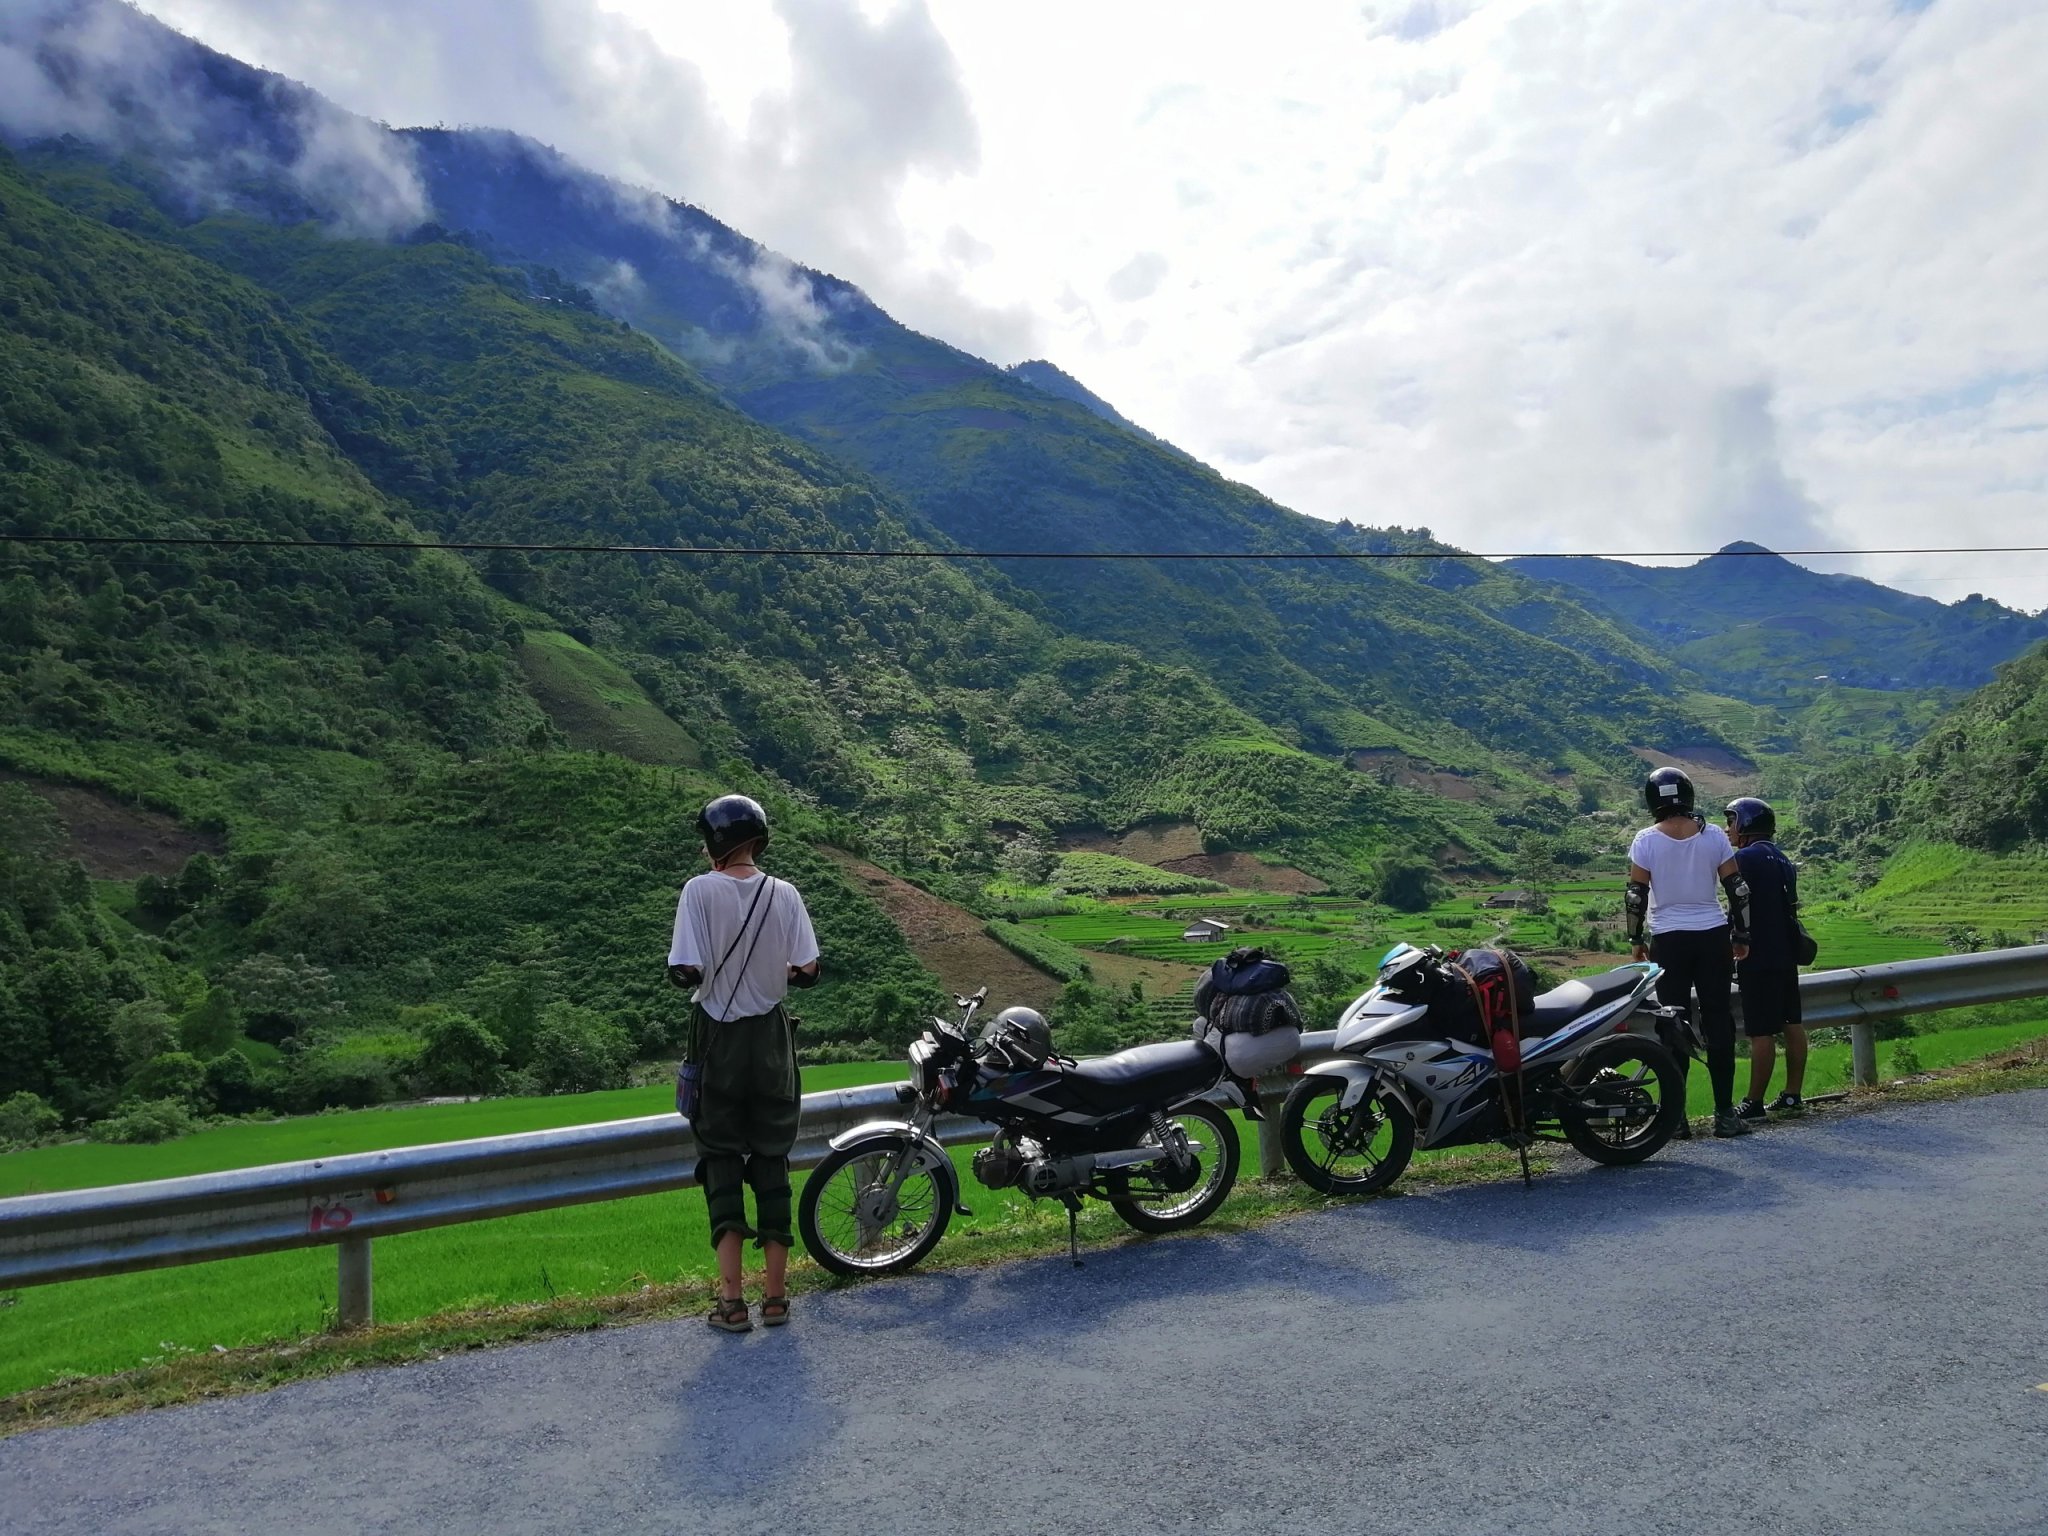 HA GIANG LOOP RIDER in 4D4N - YESD Authentic Responsible Tours